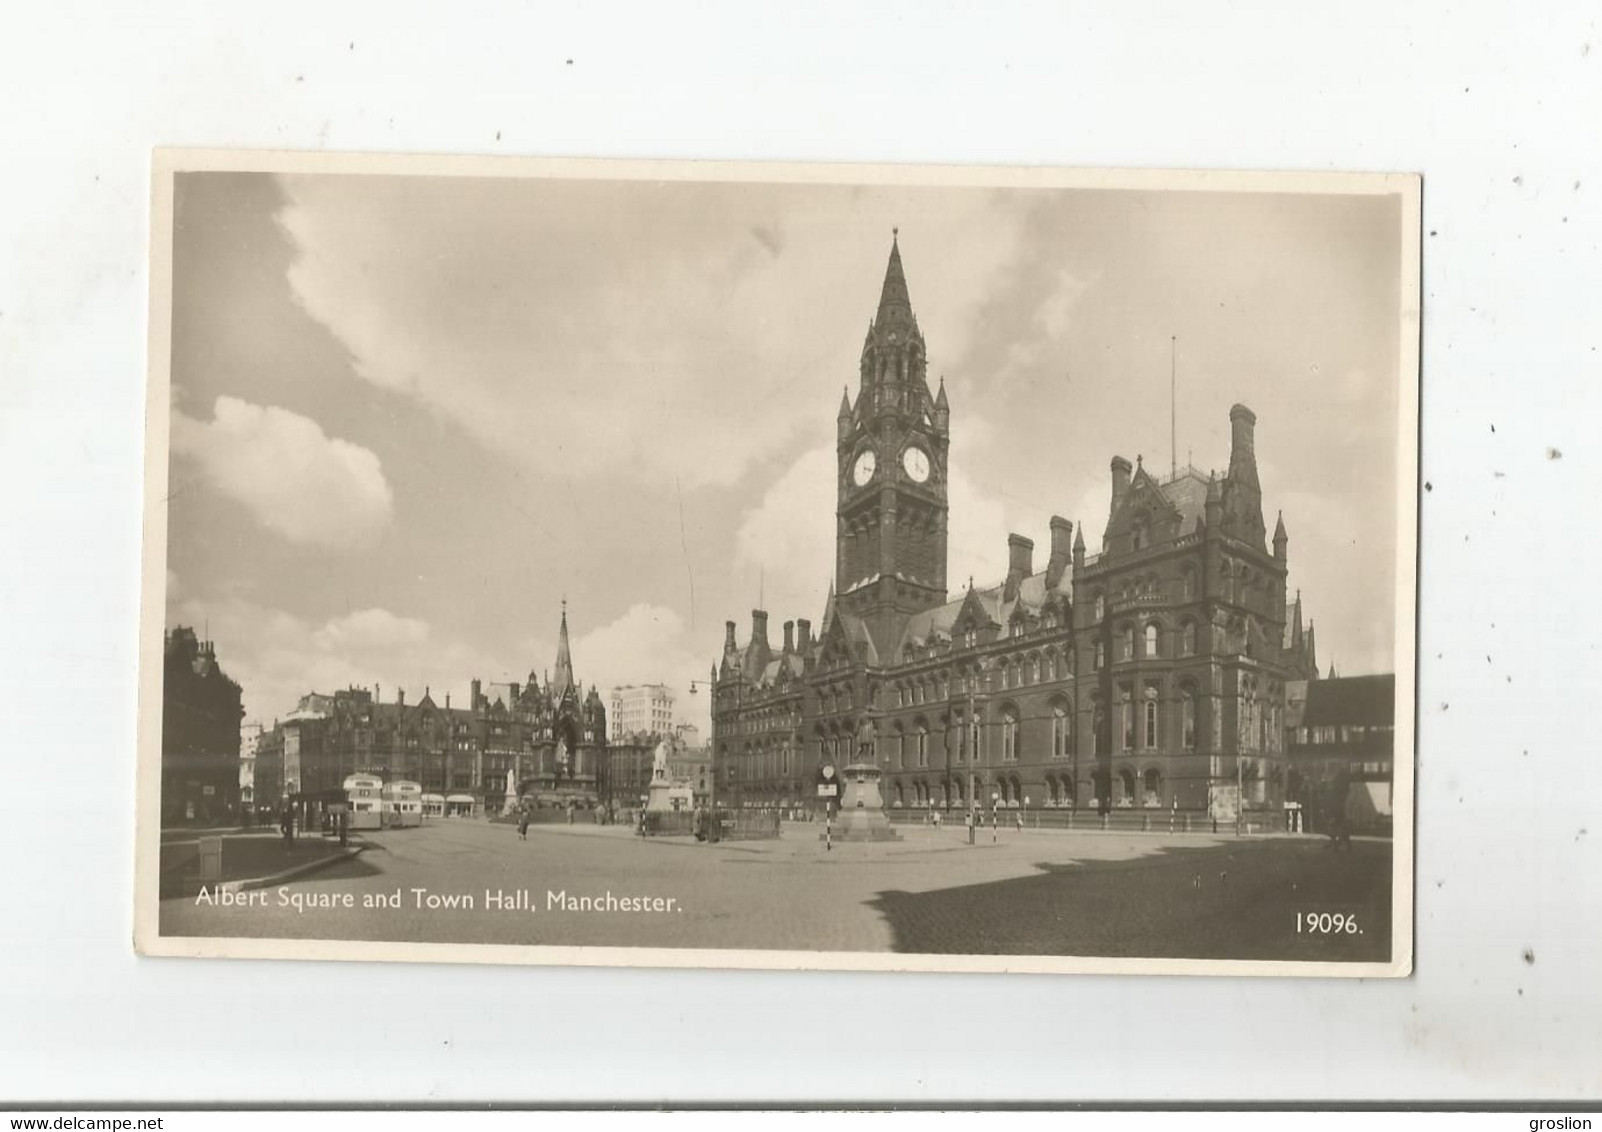 MANCHESTER 19096 ALBERT SQUARE AND TOWN HALL - Manchester